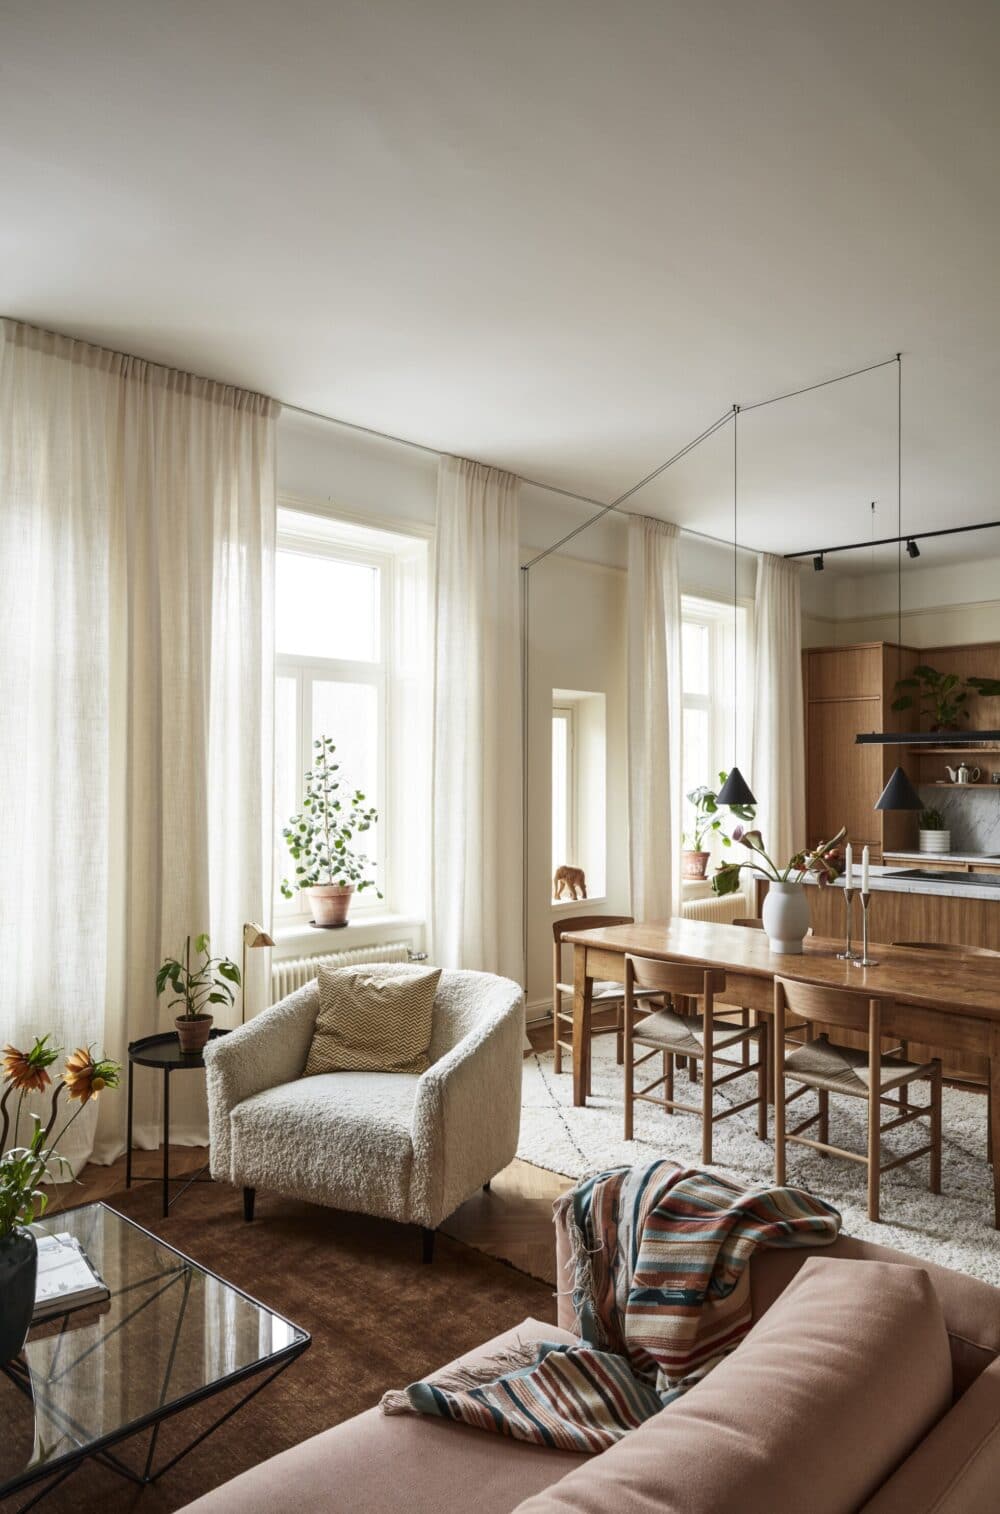 tonal decorating in an open living space apartment pink rust and wood tones